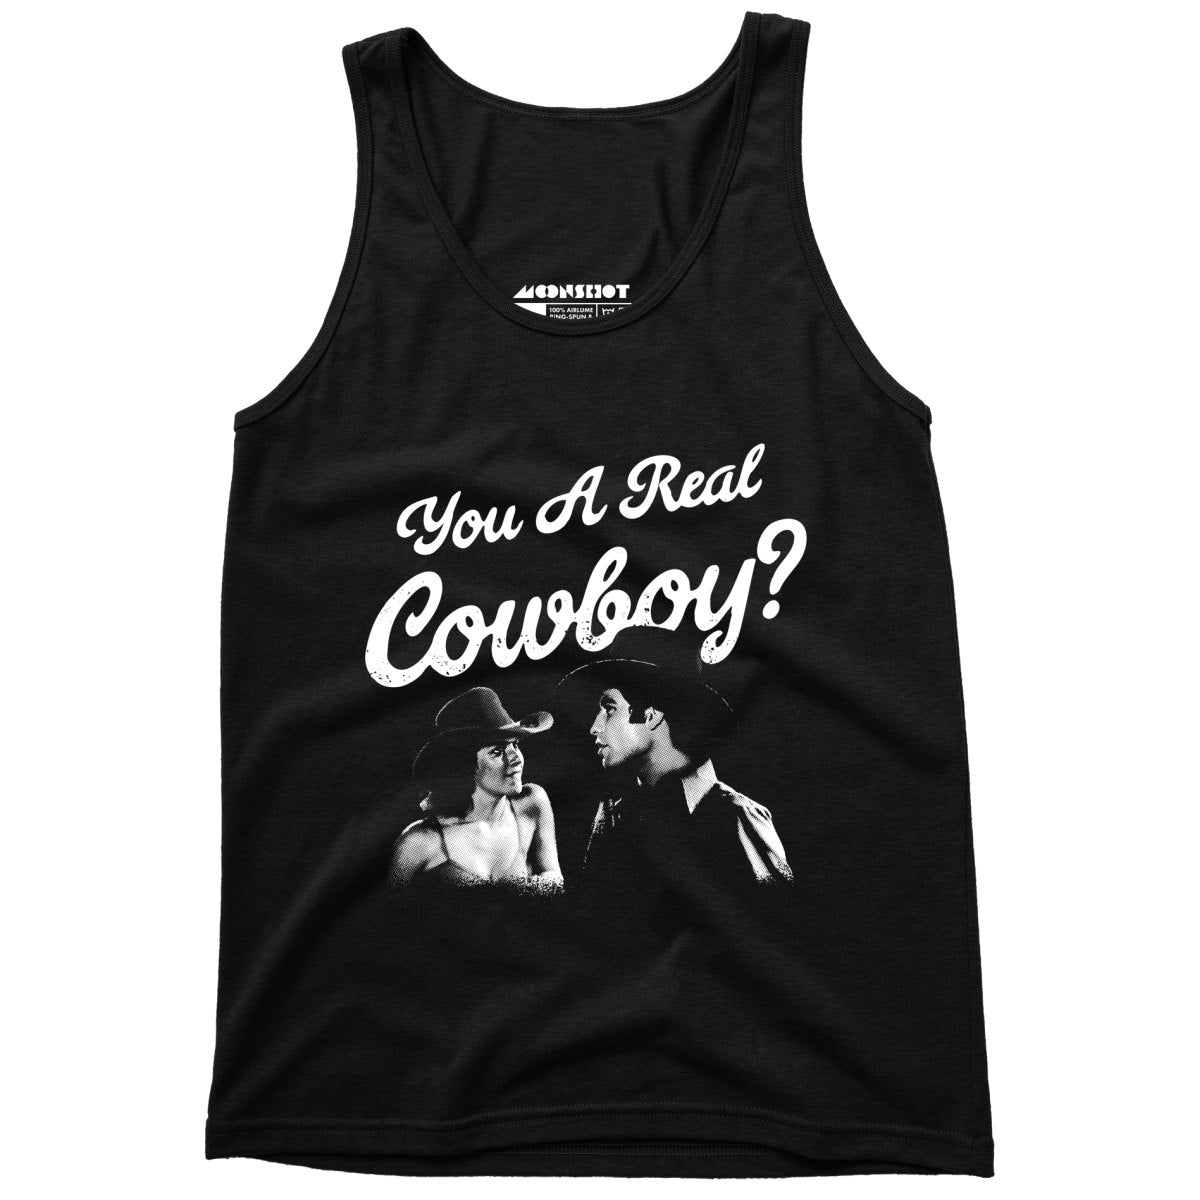 You a Real Cowboy? - Unisex Tank Top